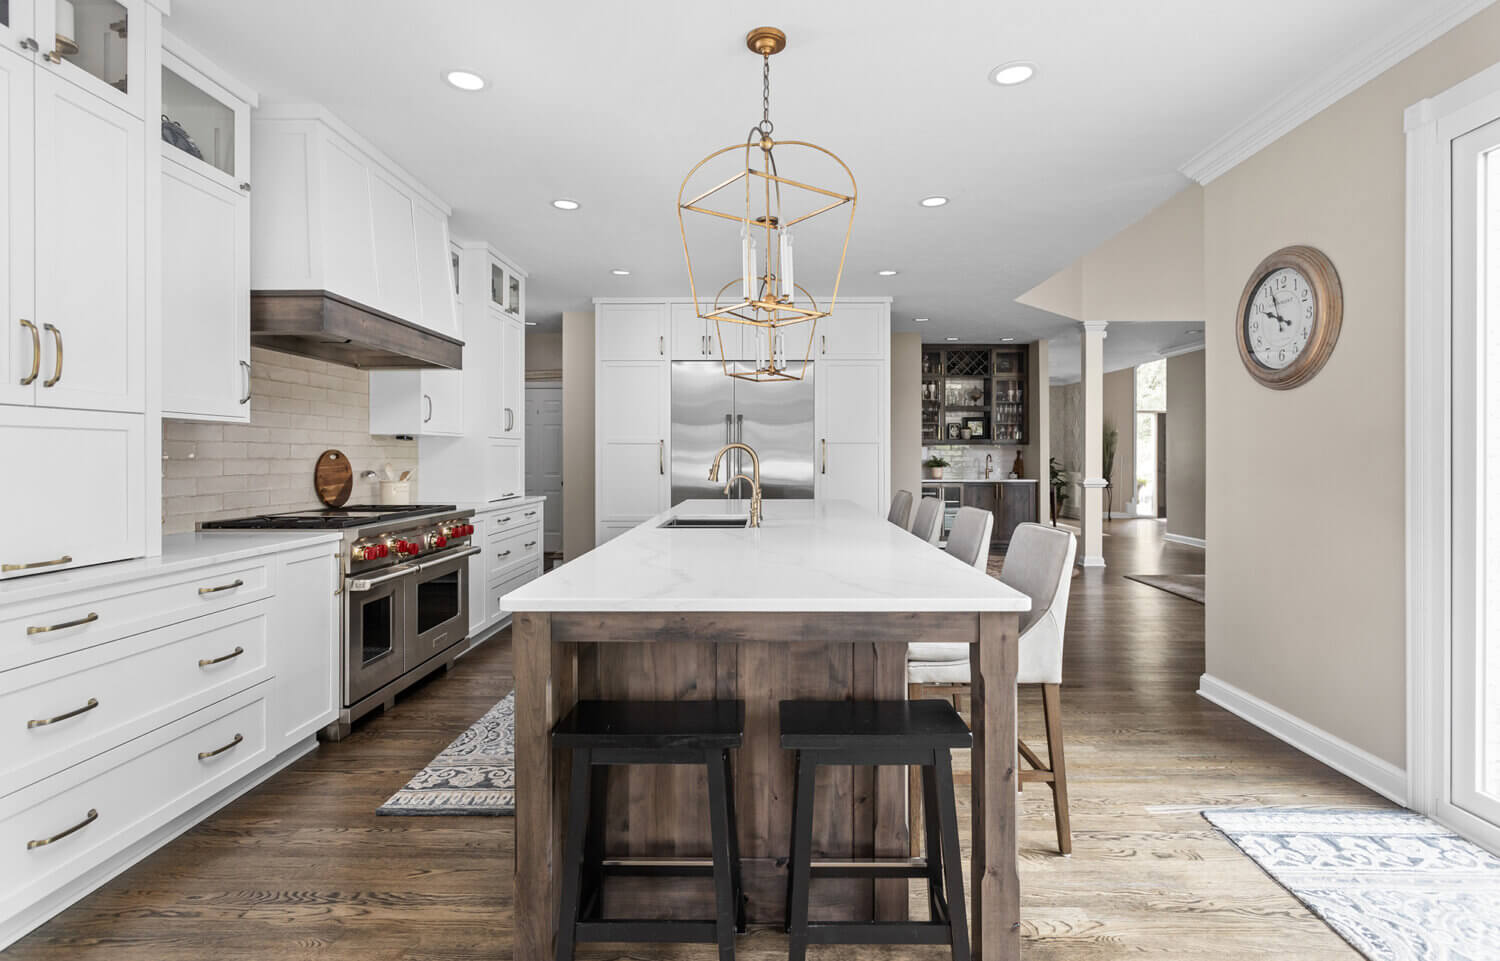 This kitchen has seating for two at the end of the kitchen island. The kitchen remodel features a mix of white and rustic knotty alder cabinets from Dura Supreme Cabinetry.